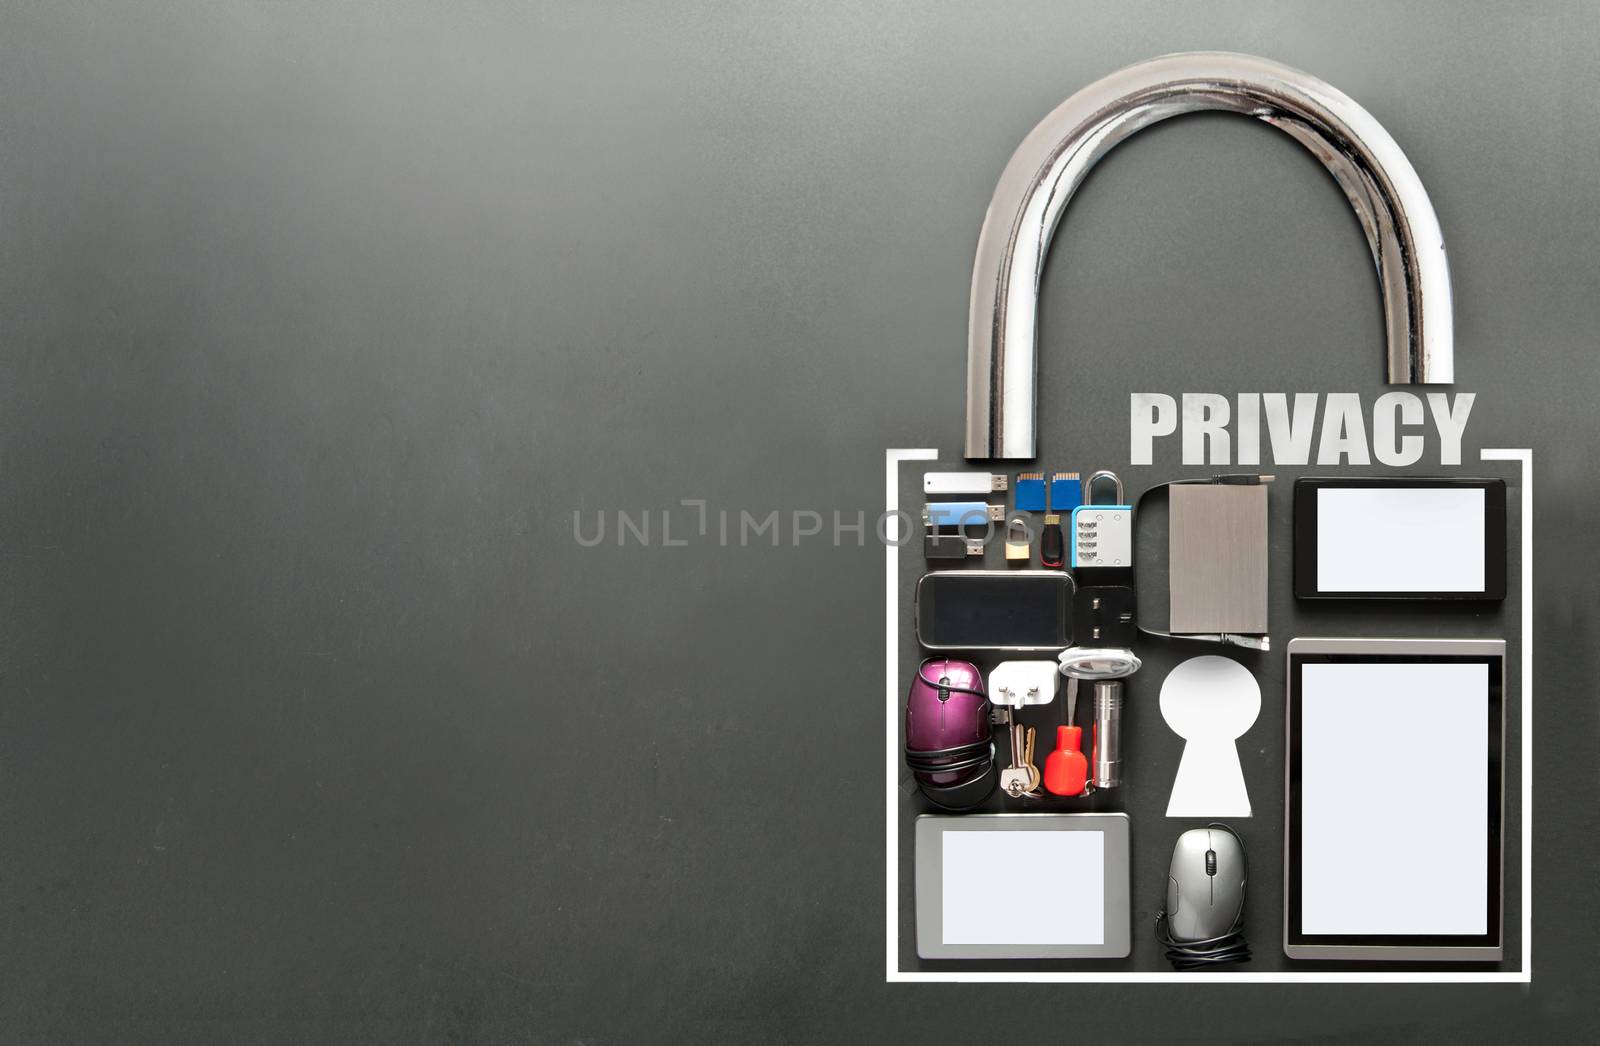 Online privacy, various devices including tablets, computer mouse, usb cards in the shape of a padlock on a chalkboard background